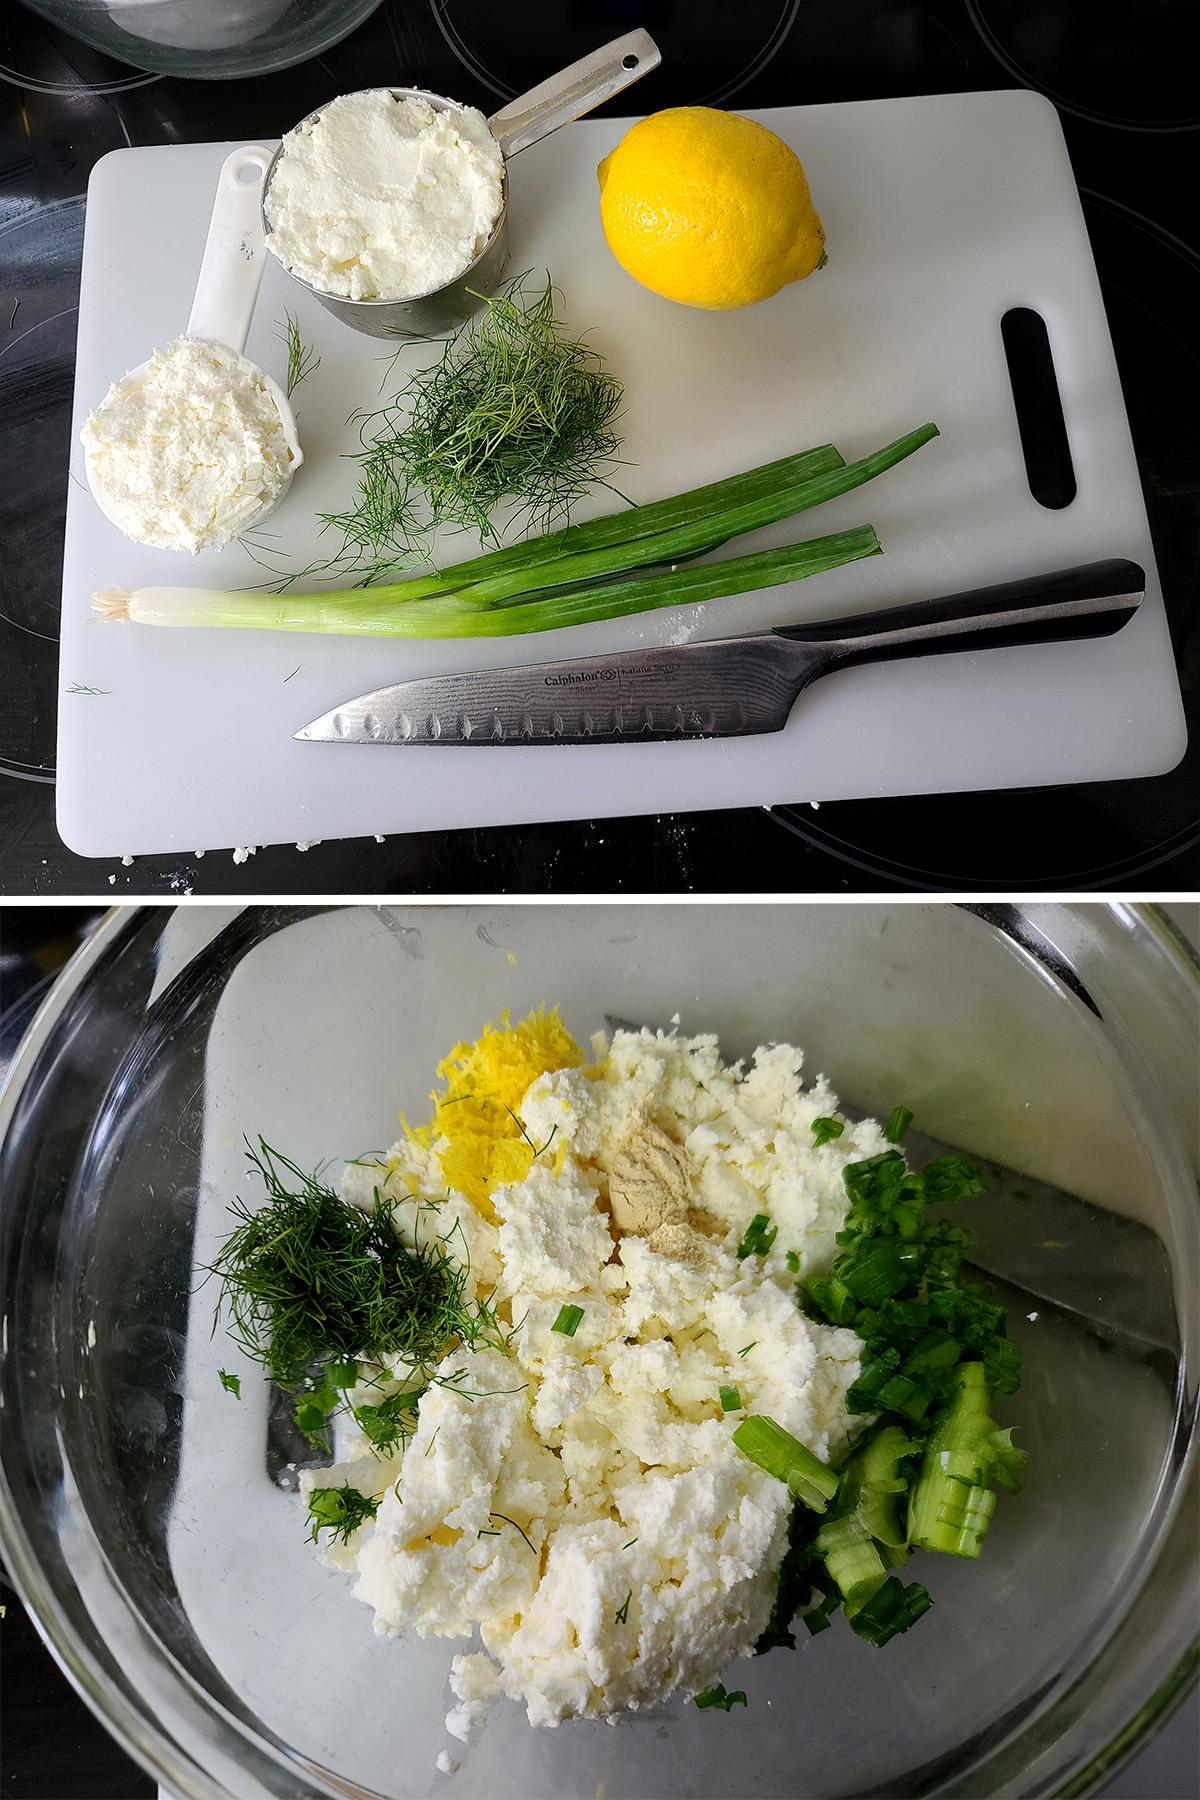 A cutting board with a lemon, the cheeses, dill, and green onions, then all of those ingredients in a bowl.